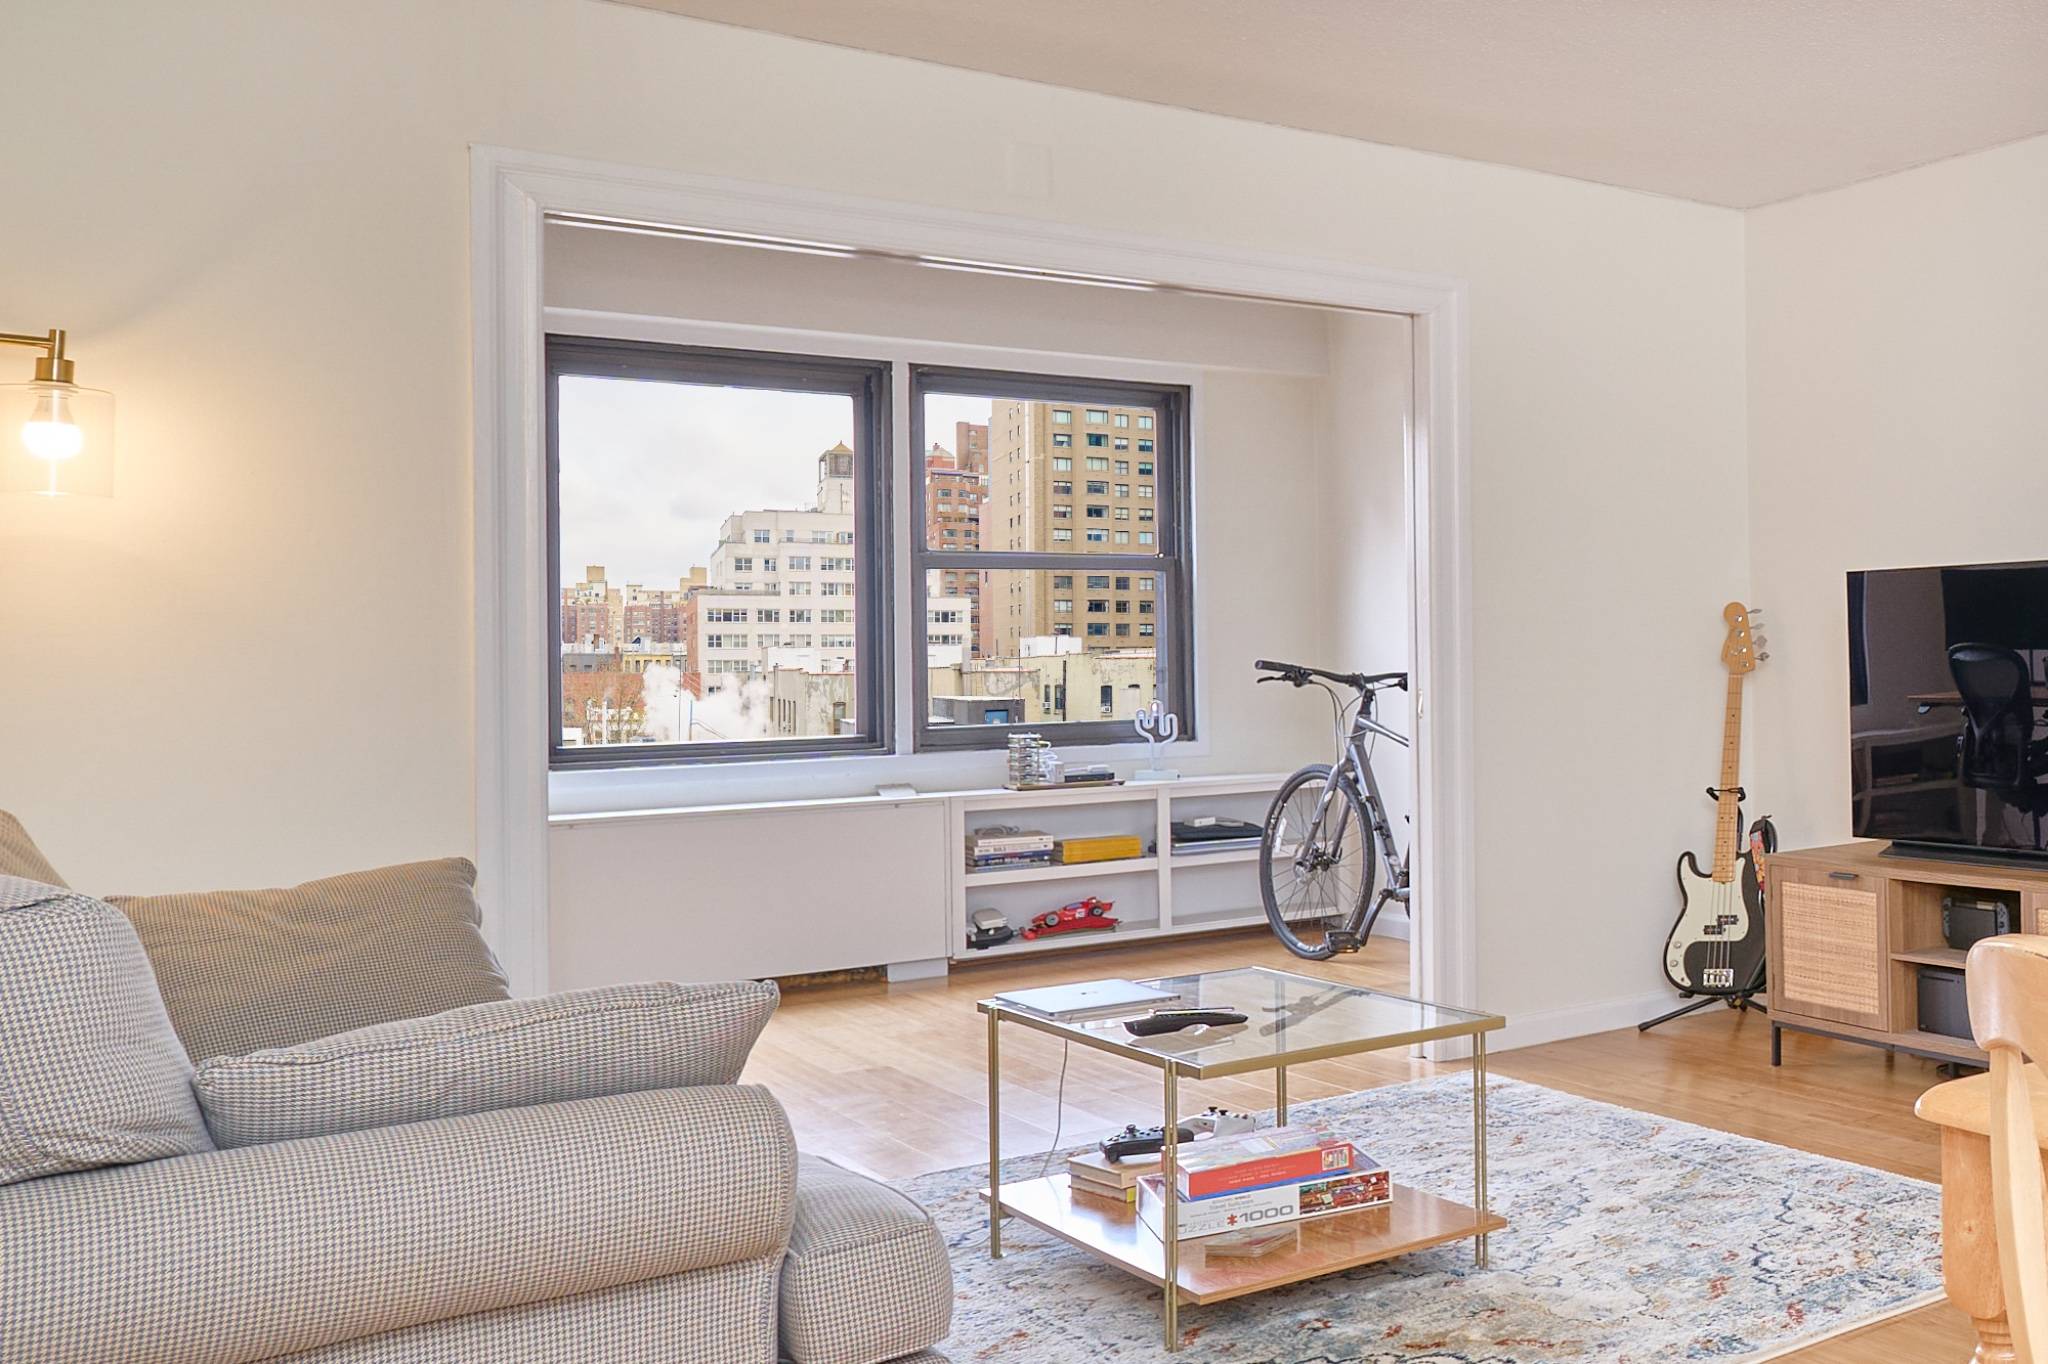 STUNNING EAST 81st STREET ONE BEDROOM CONDO w HOME OFFICE.